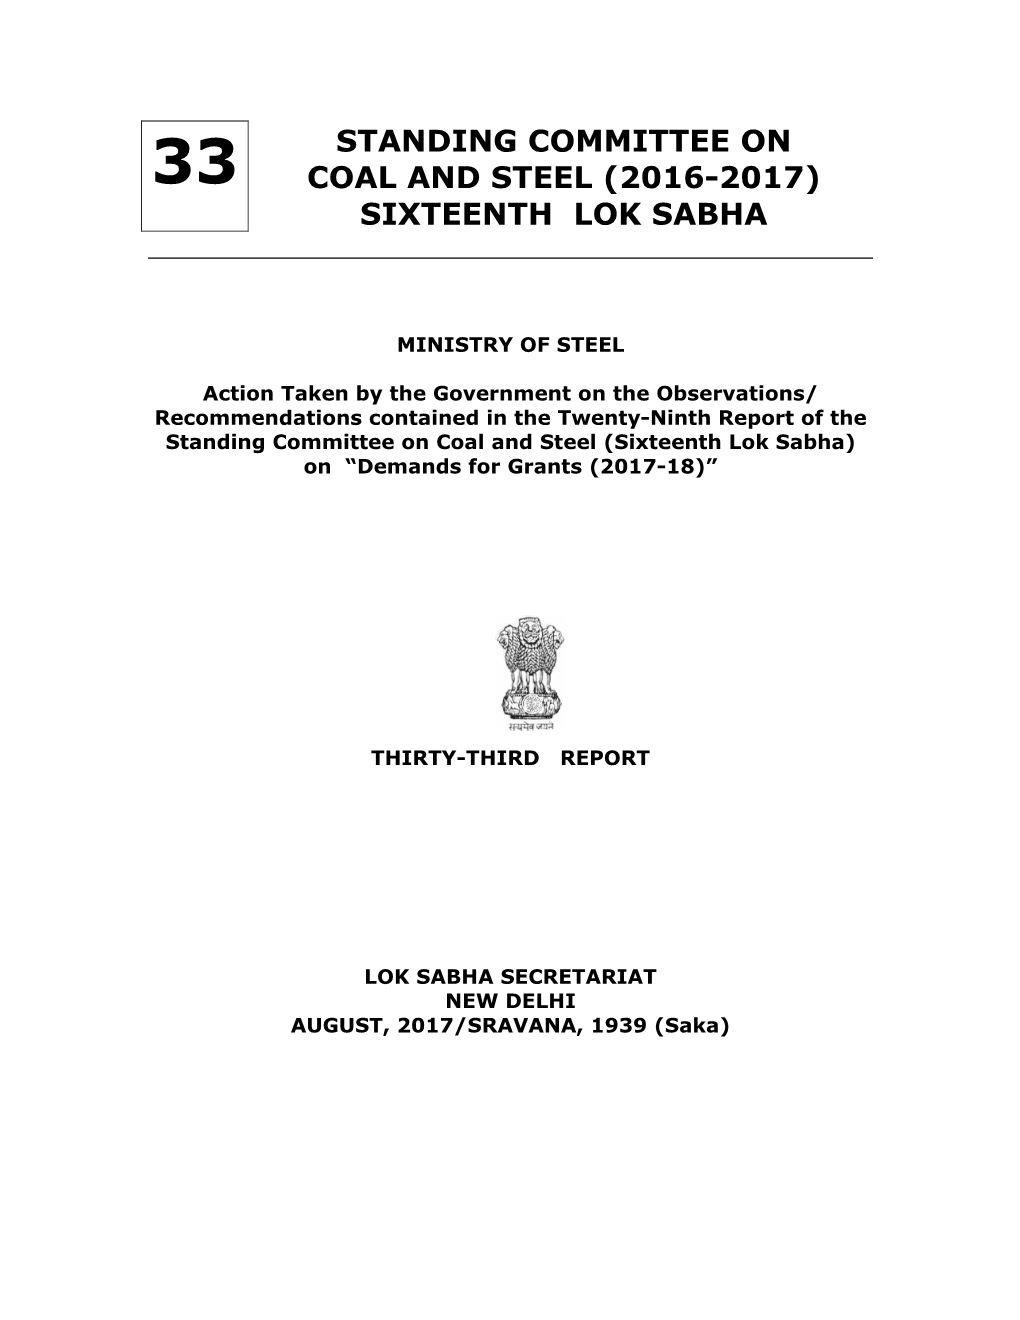 Standing Committee on Coal and Steel (2016-2017)